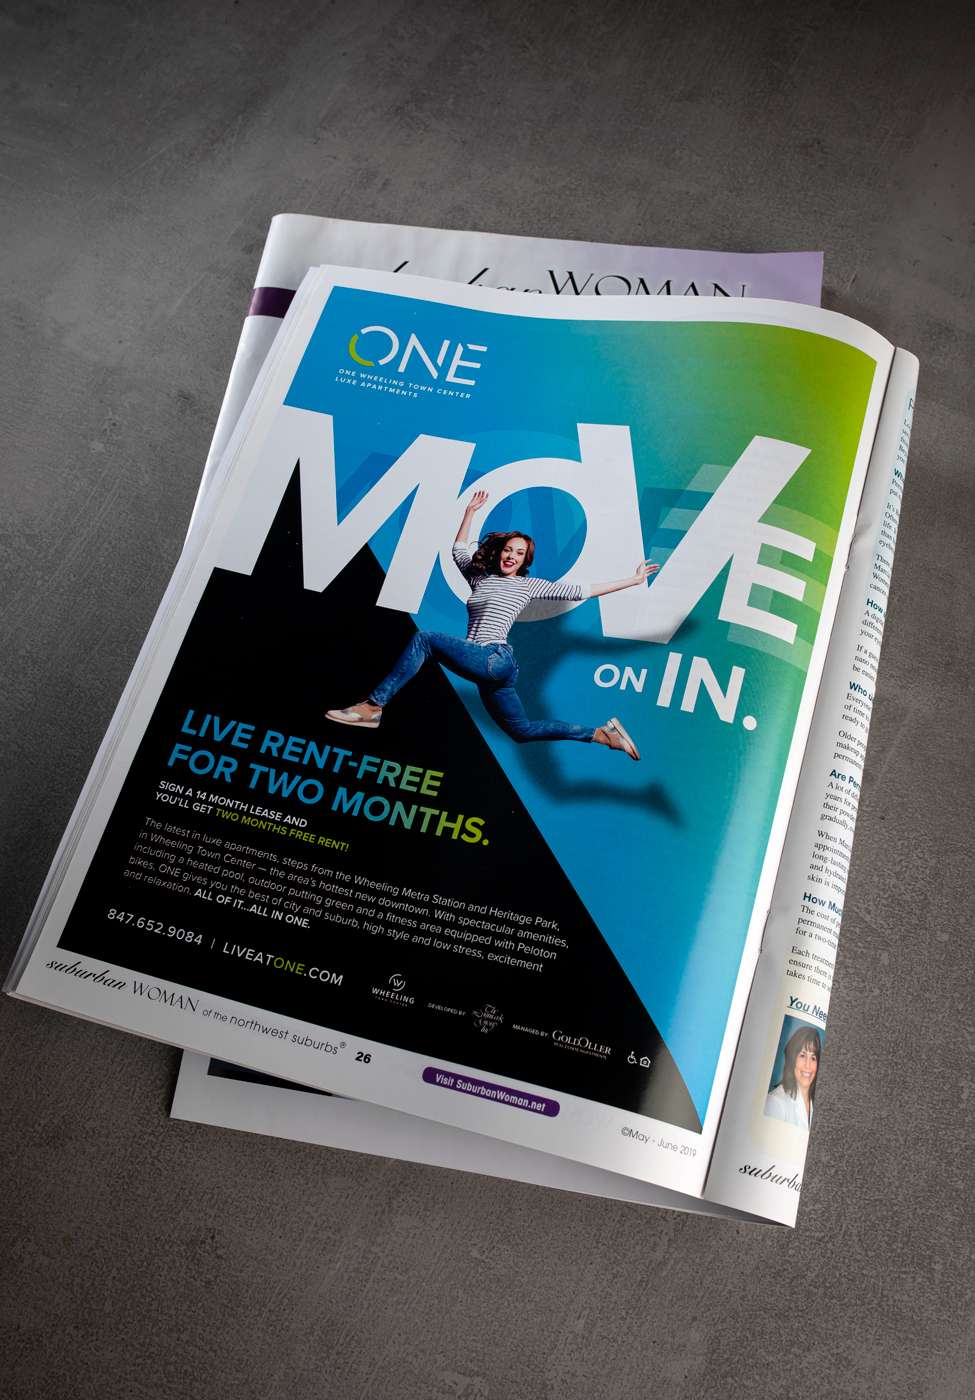 Print magazine ad created for ONE Wheeling Town Center using the MOVE creative campaign